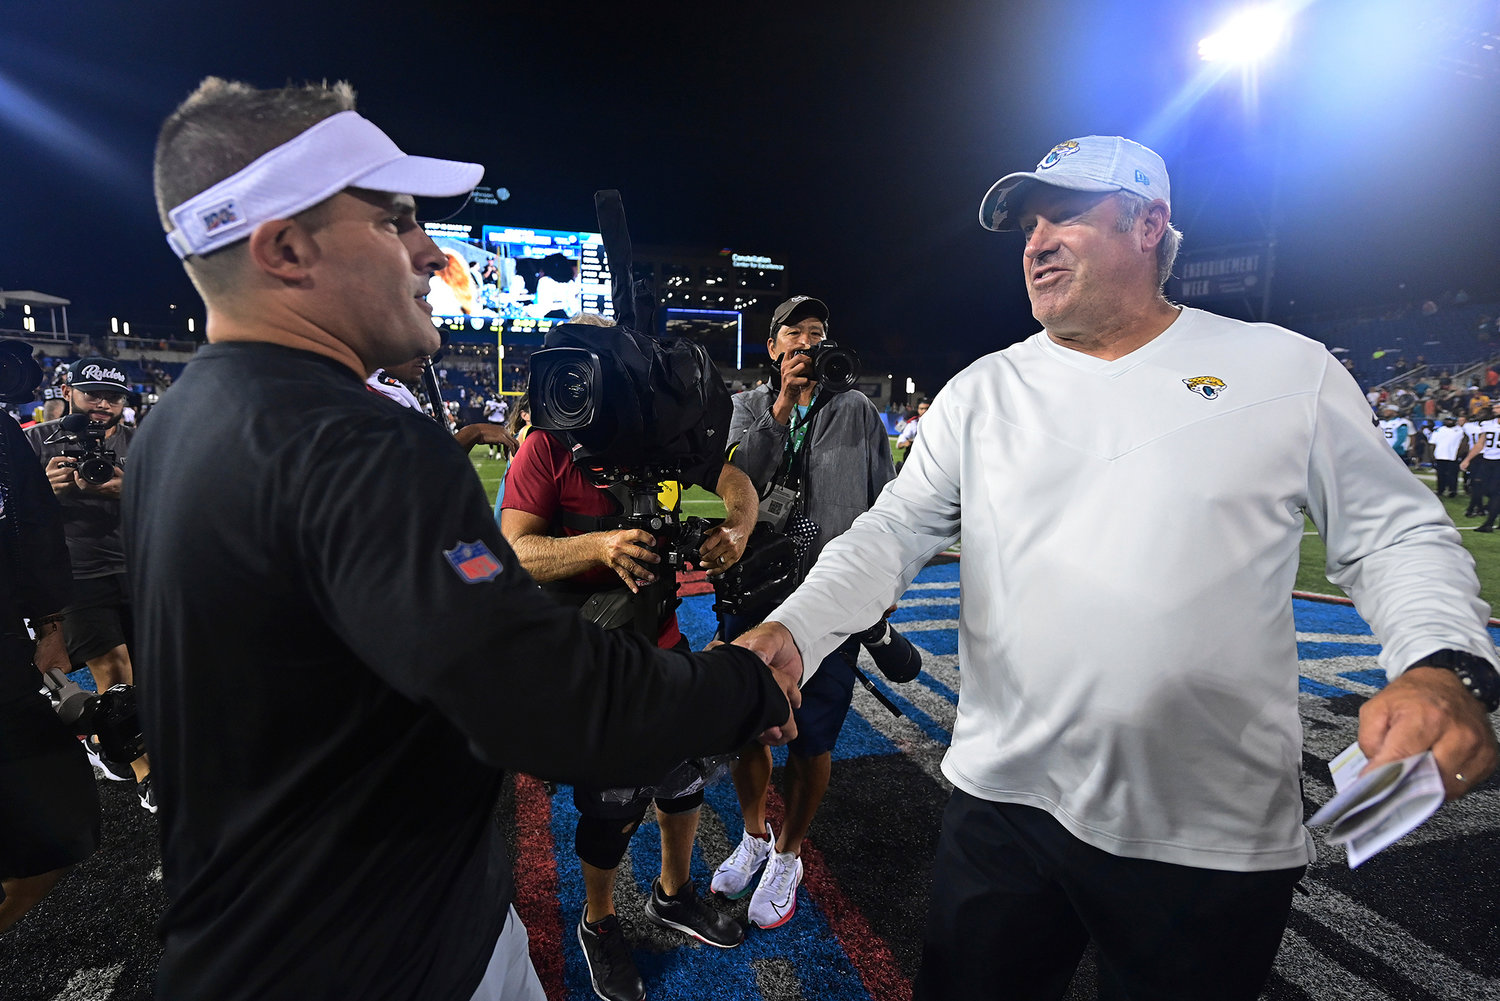 Jacksonville Jaguars coach Doug Pederson, right, shakes hands with Las Vegas Raiders coach Josh McDaniels after the Hall of Fame game on Thursday night in Canton, Ohio. The Raiders won 27-11.